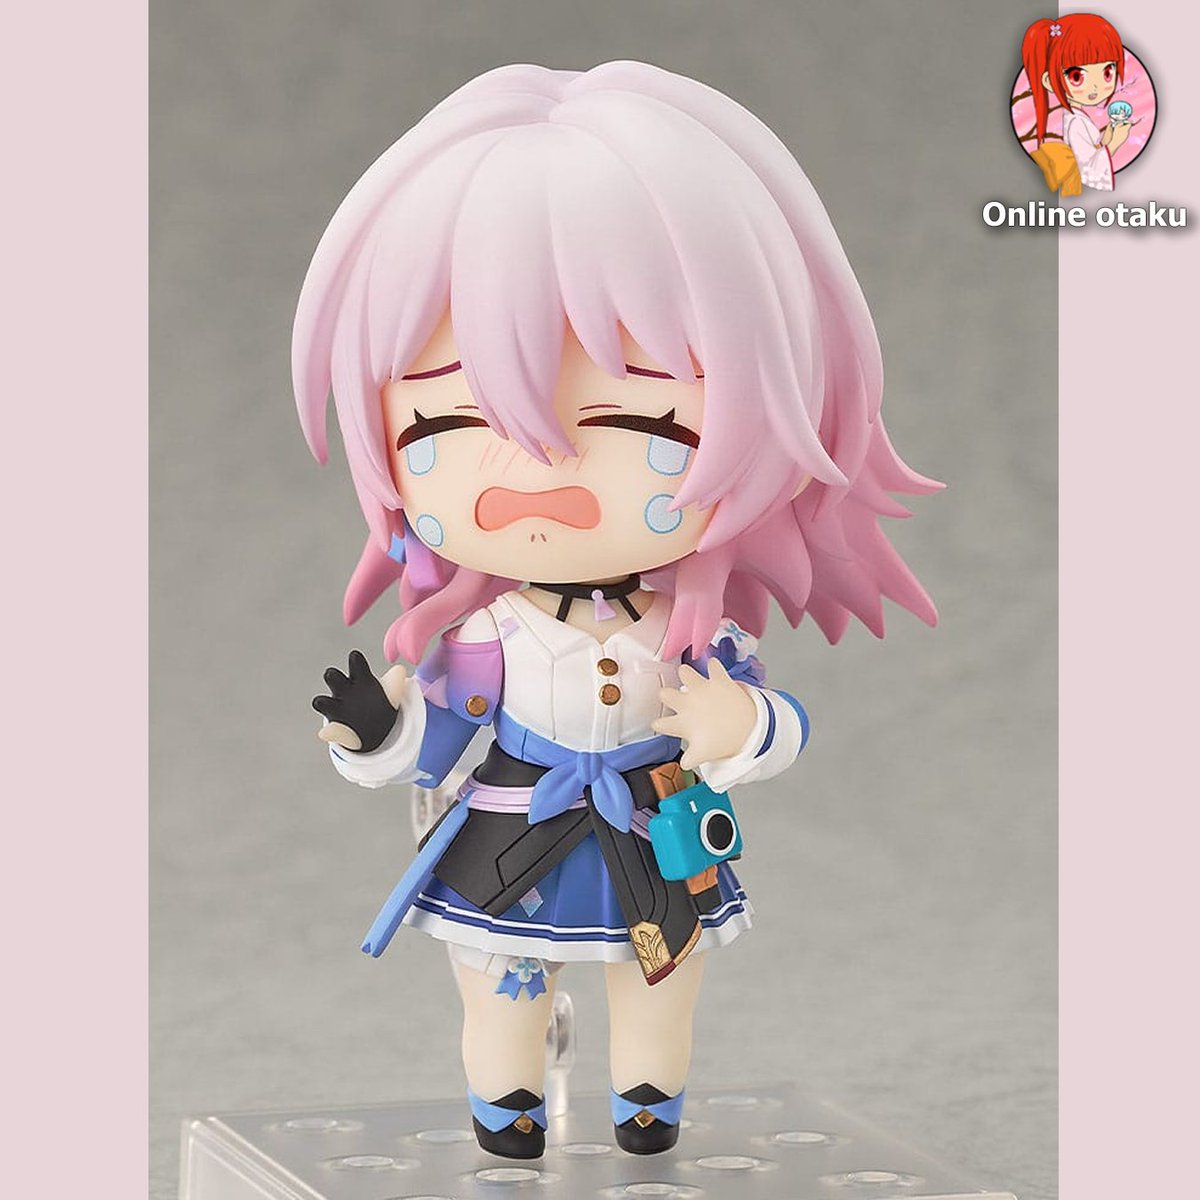 🌟 Bring the excitement of Honkai Star Rail to life with our March 7th Nendoroid Action Figure! This adorable 10 cm figure is perfect for any fan. Pre-order now: online-otaku.com/en/shop/item/2… #HonkaiStarRail #Nendoroid #March7th #OnlineOtaku #AnimeFigure #FigureCollection